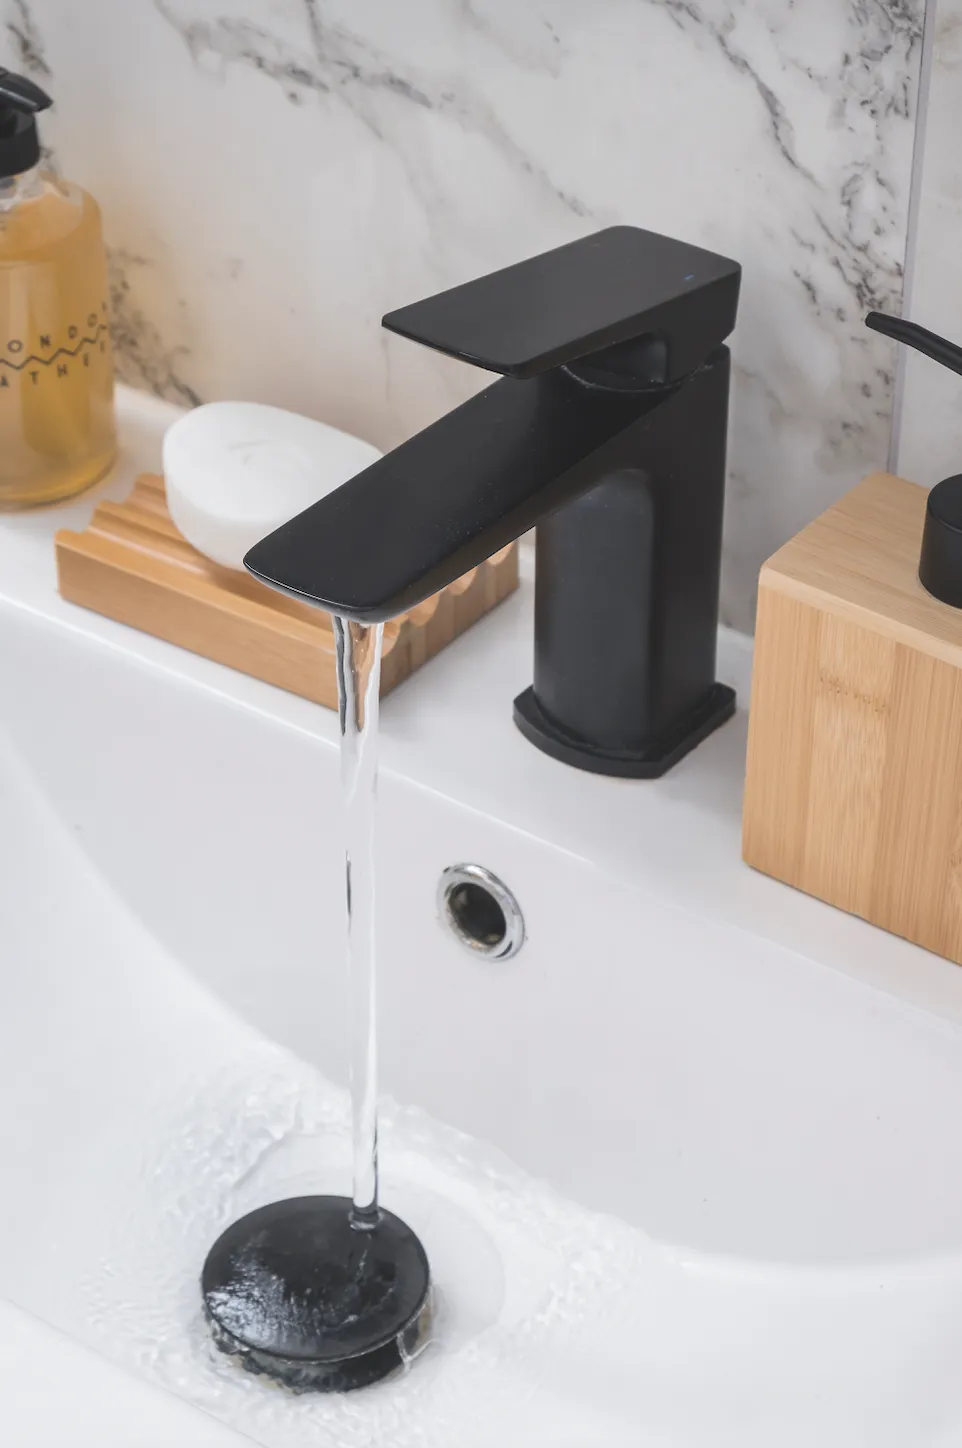 A contemporary mono mixer in a matt black finish complements the grey veining in the marble-effect tiles